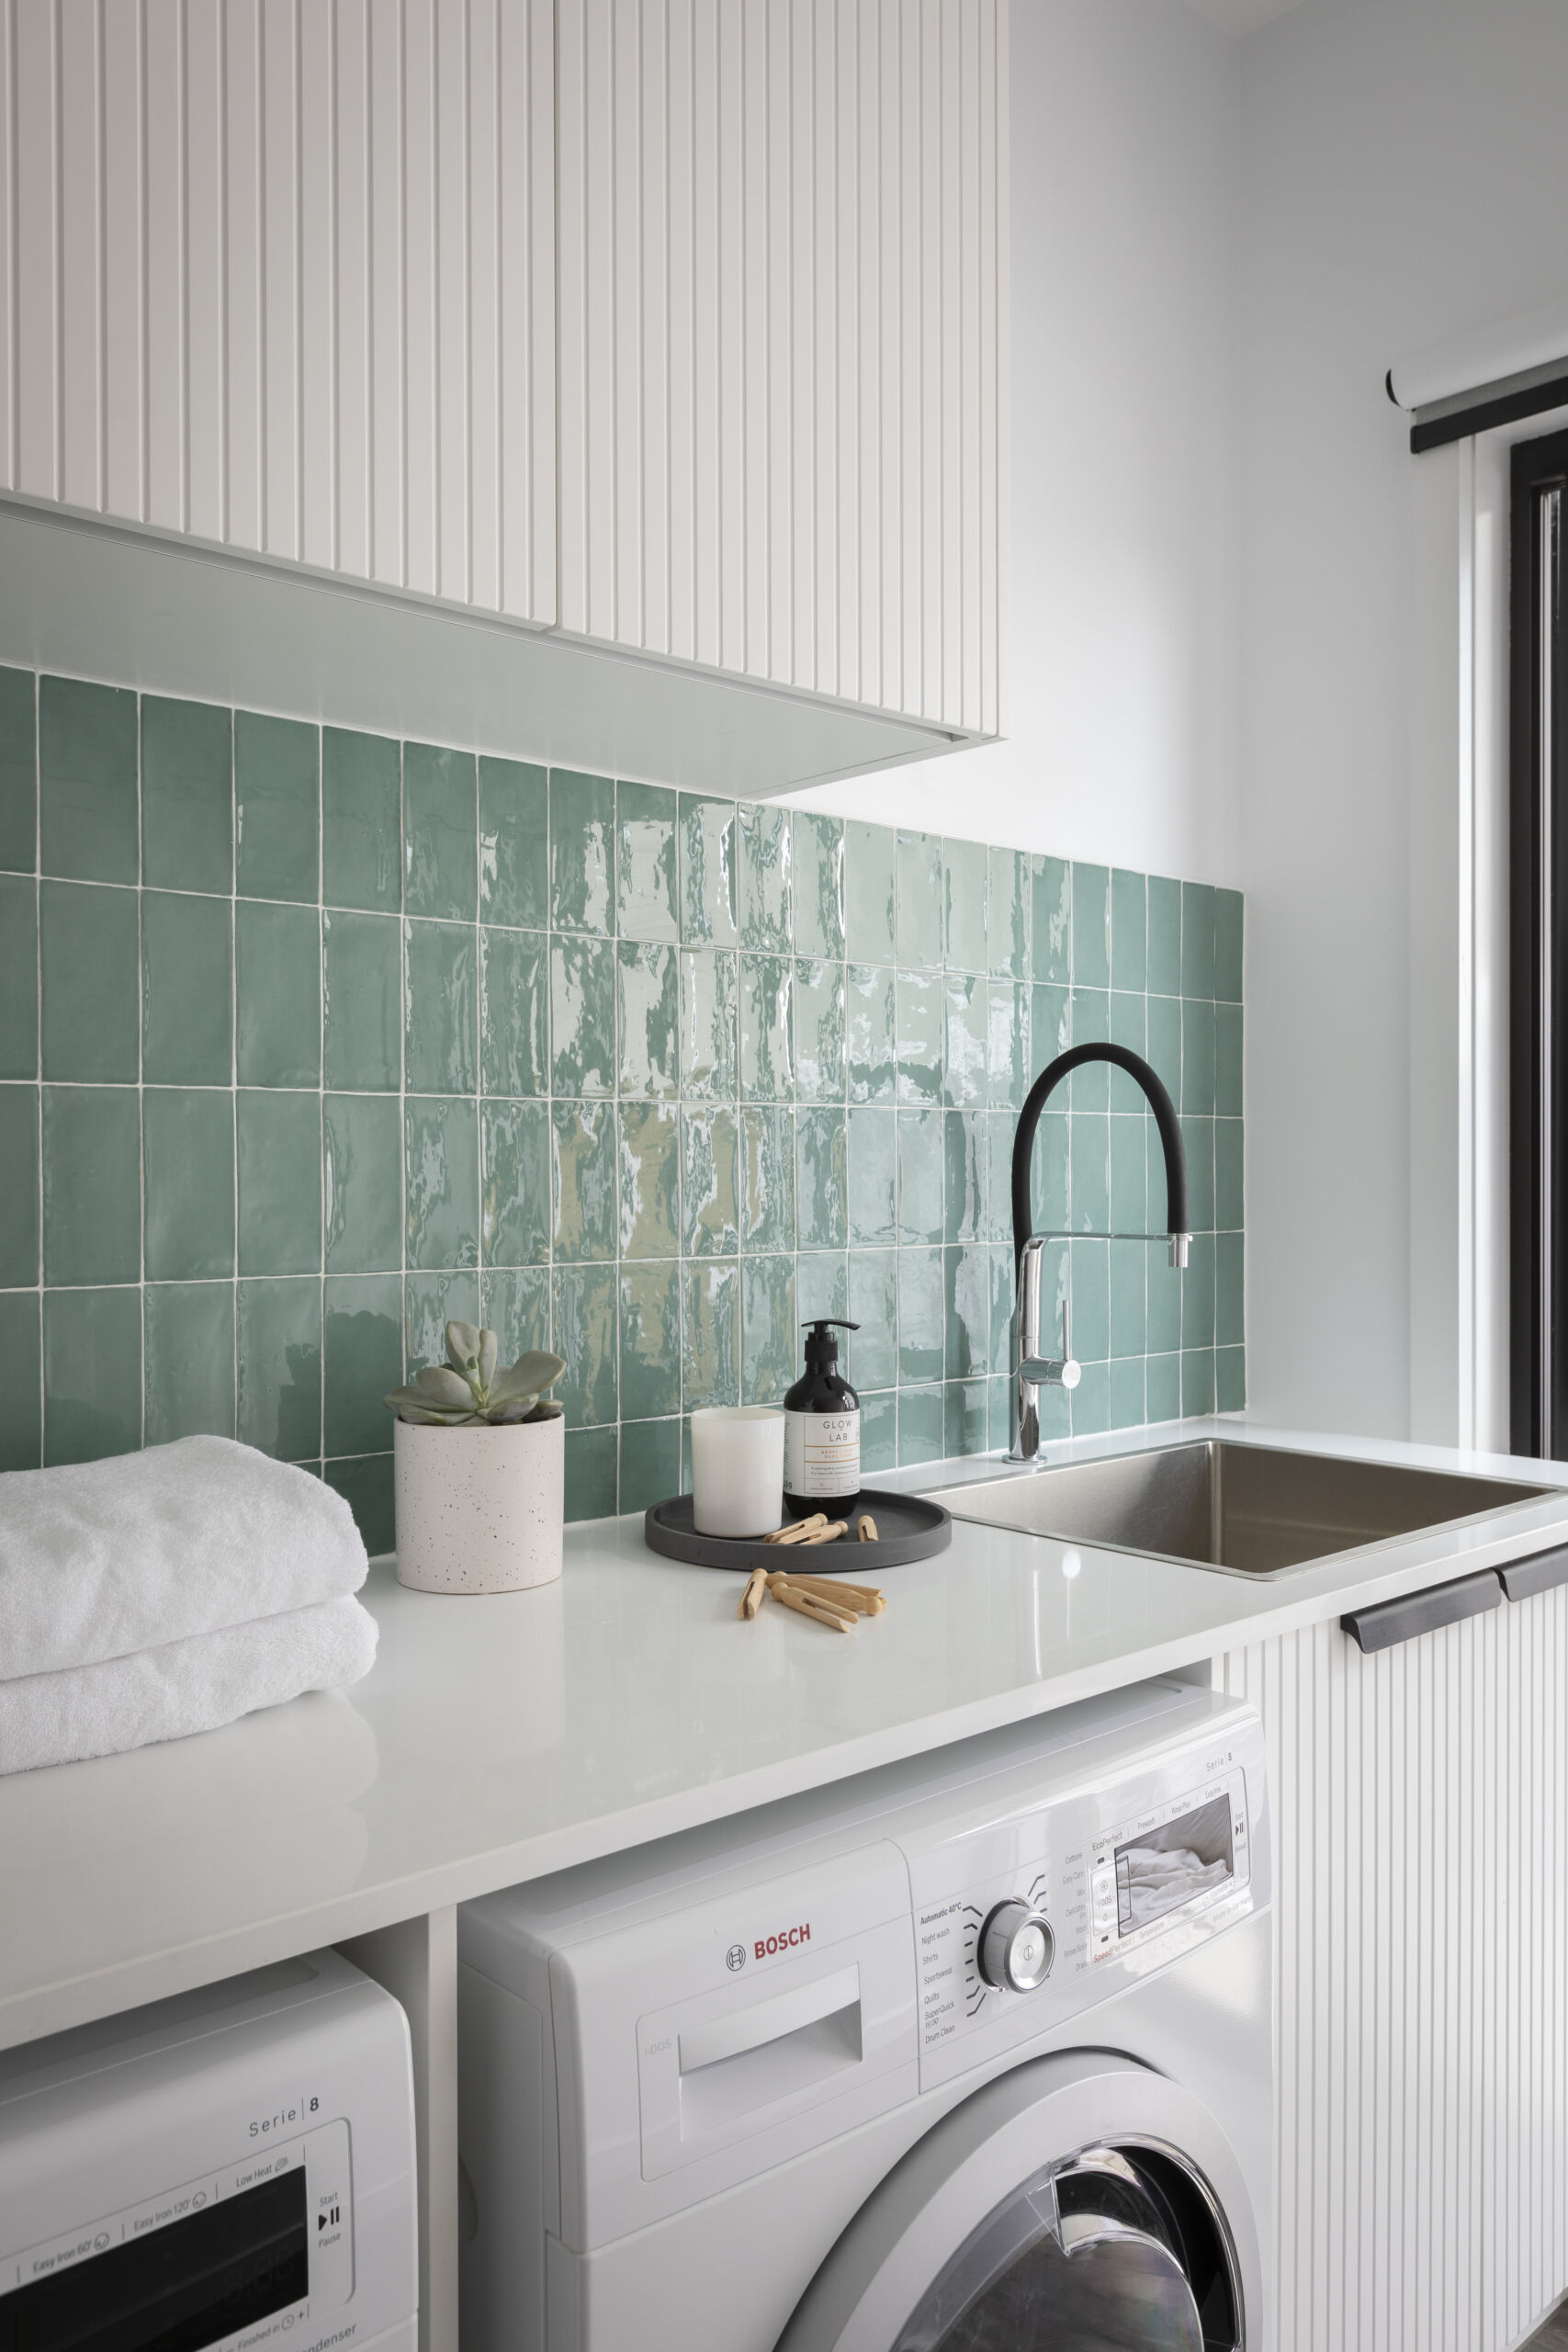 Laundry design trends add a pop of colour through the splashback. 